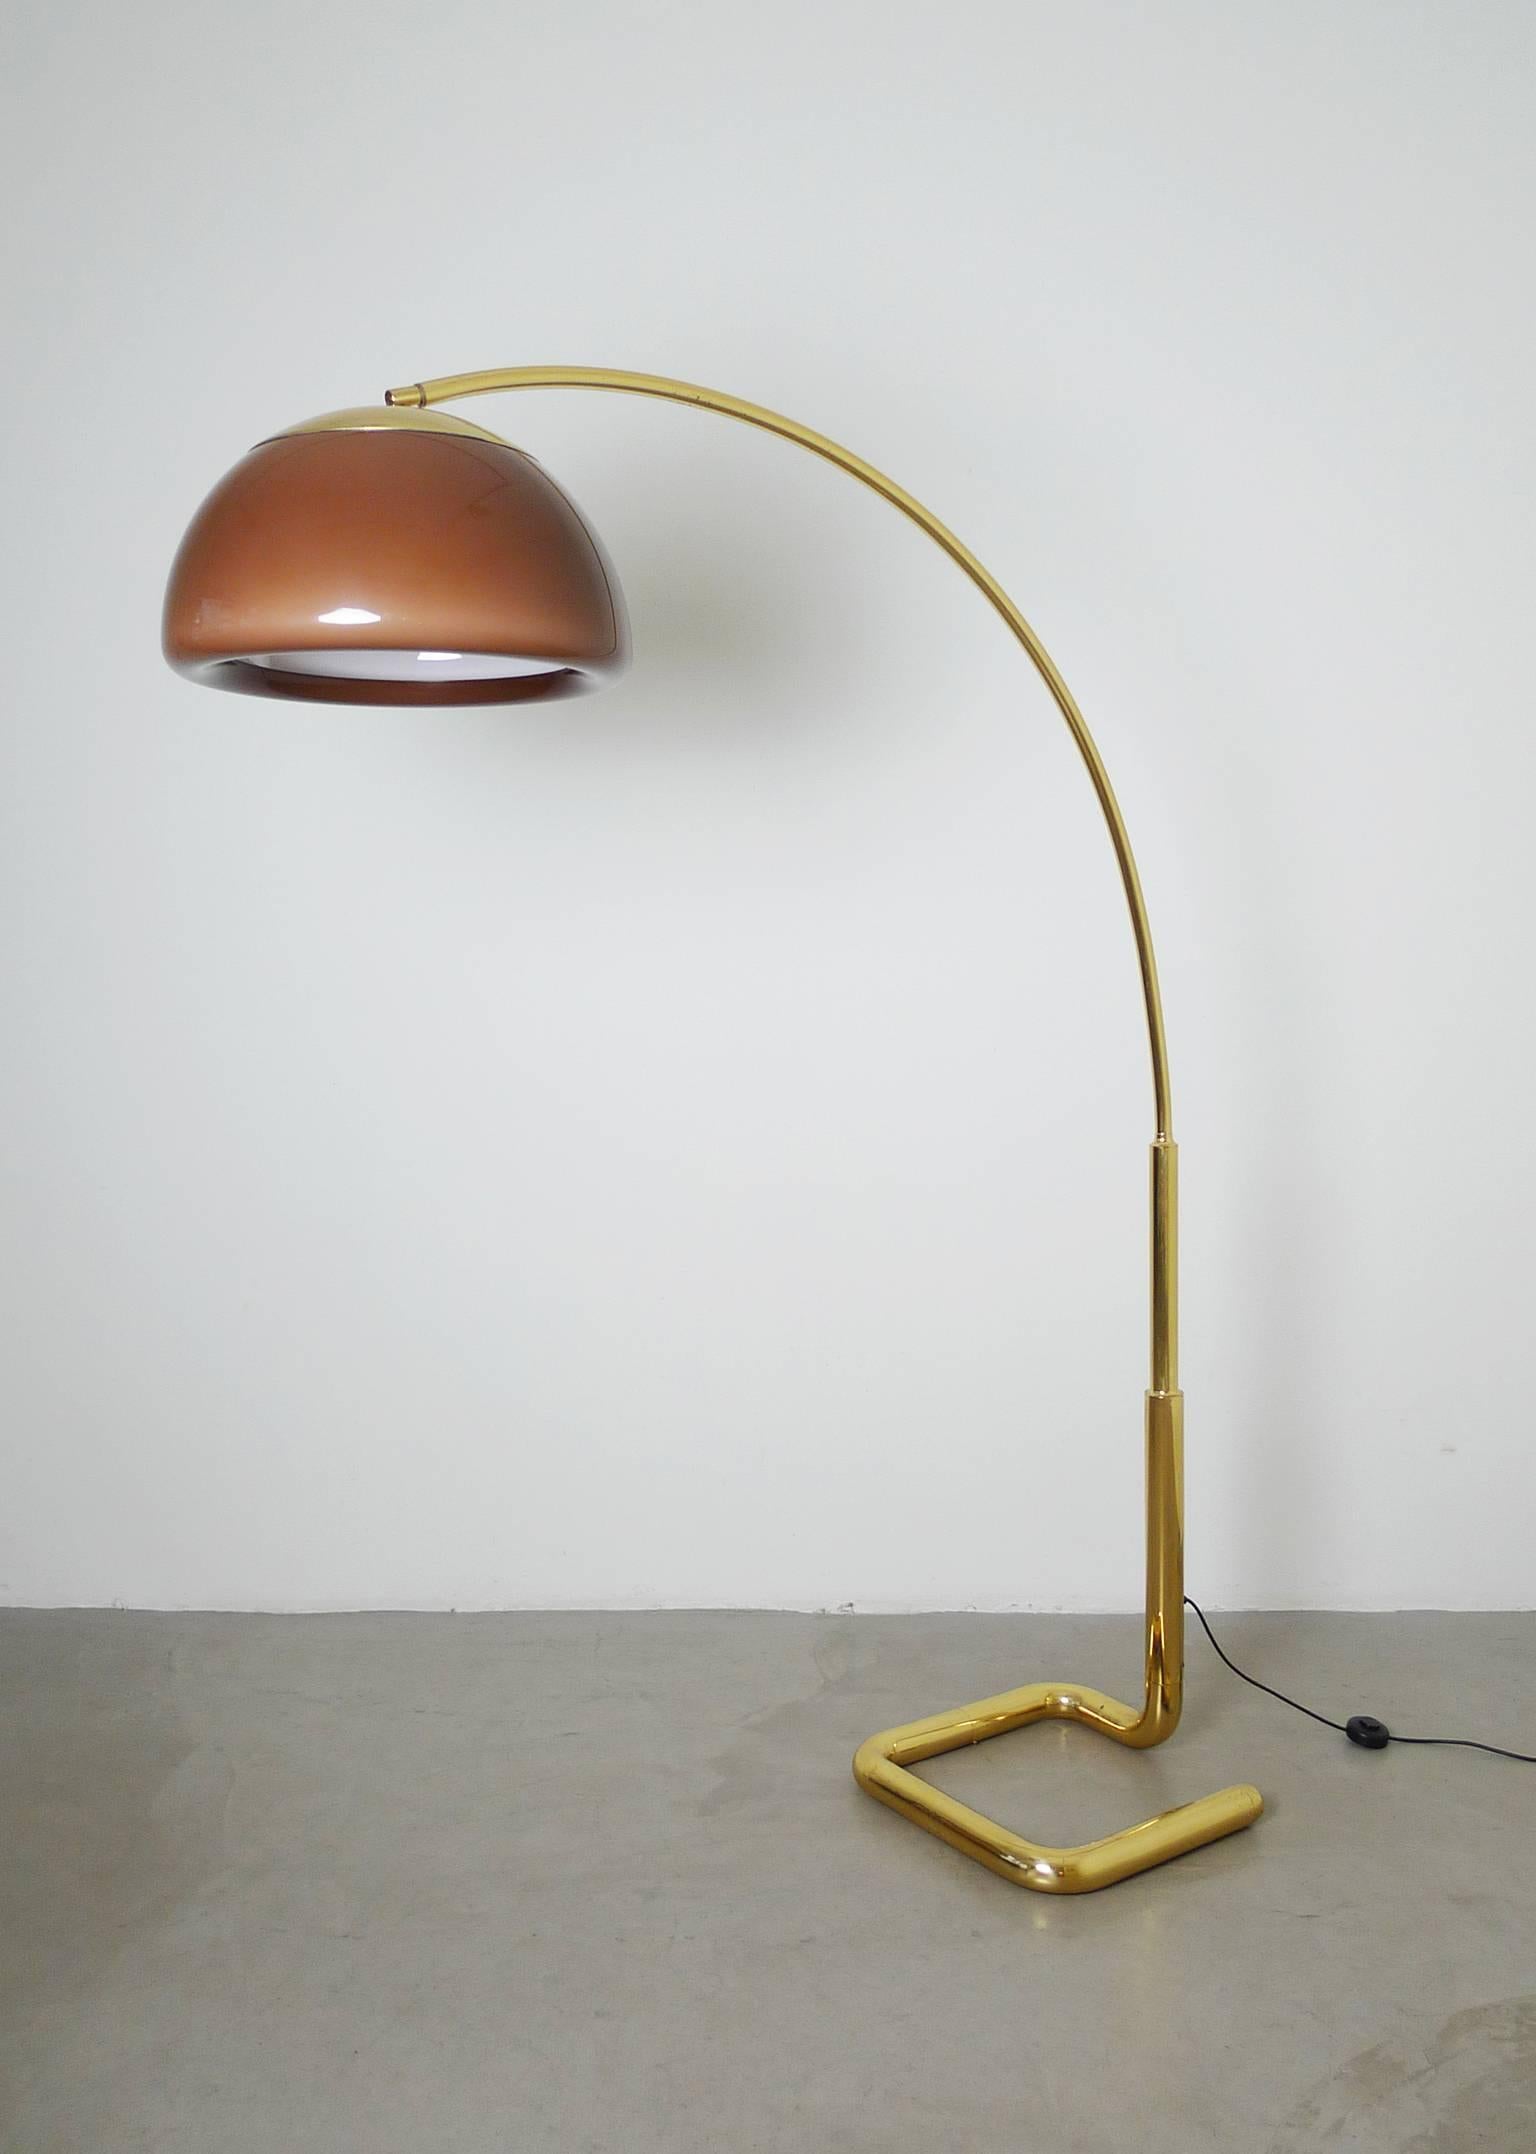 This impressive arc lamp with thick brass stand and adjustable plastic shade was produced by the German lamp manufacturer Cosack in the 1970s. The huge floor lamp has one E 27 bulb holder and is in very good condition.